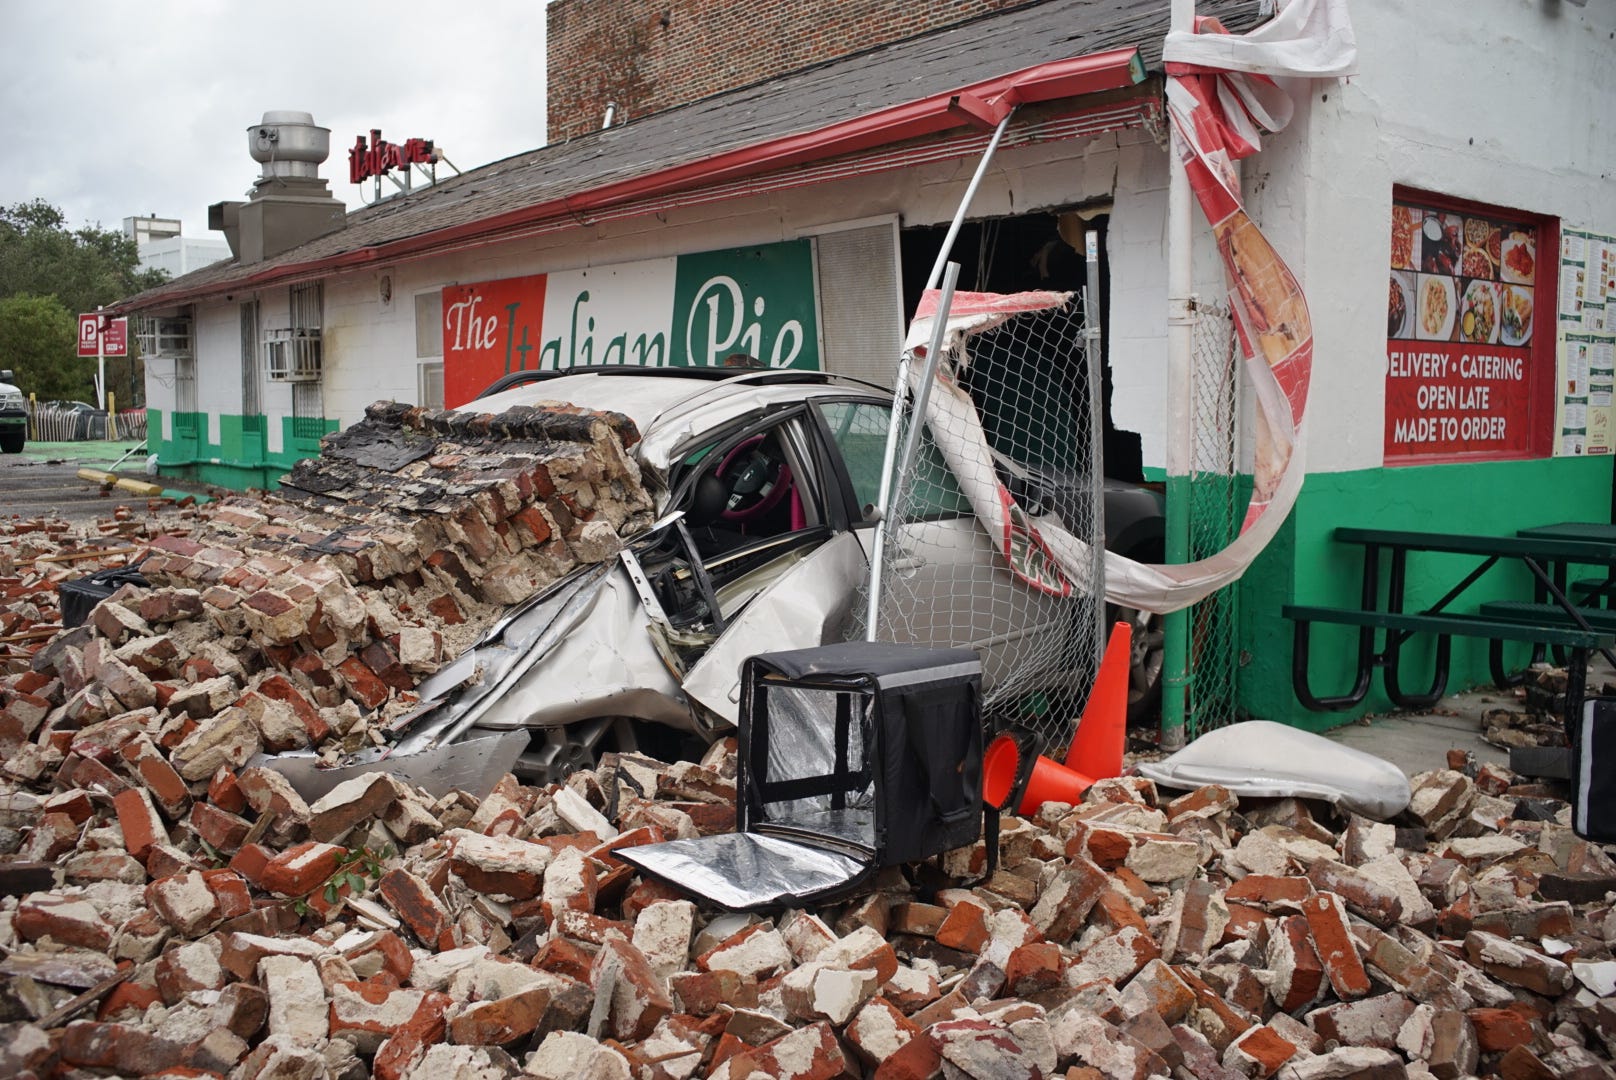 A car and a storefront are seen buried under debris